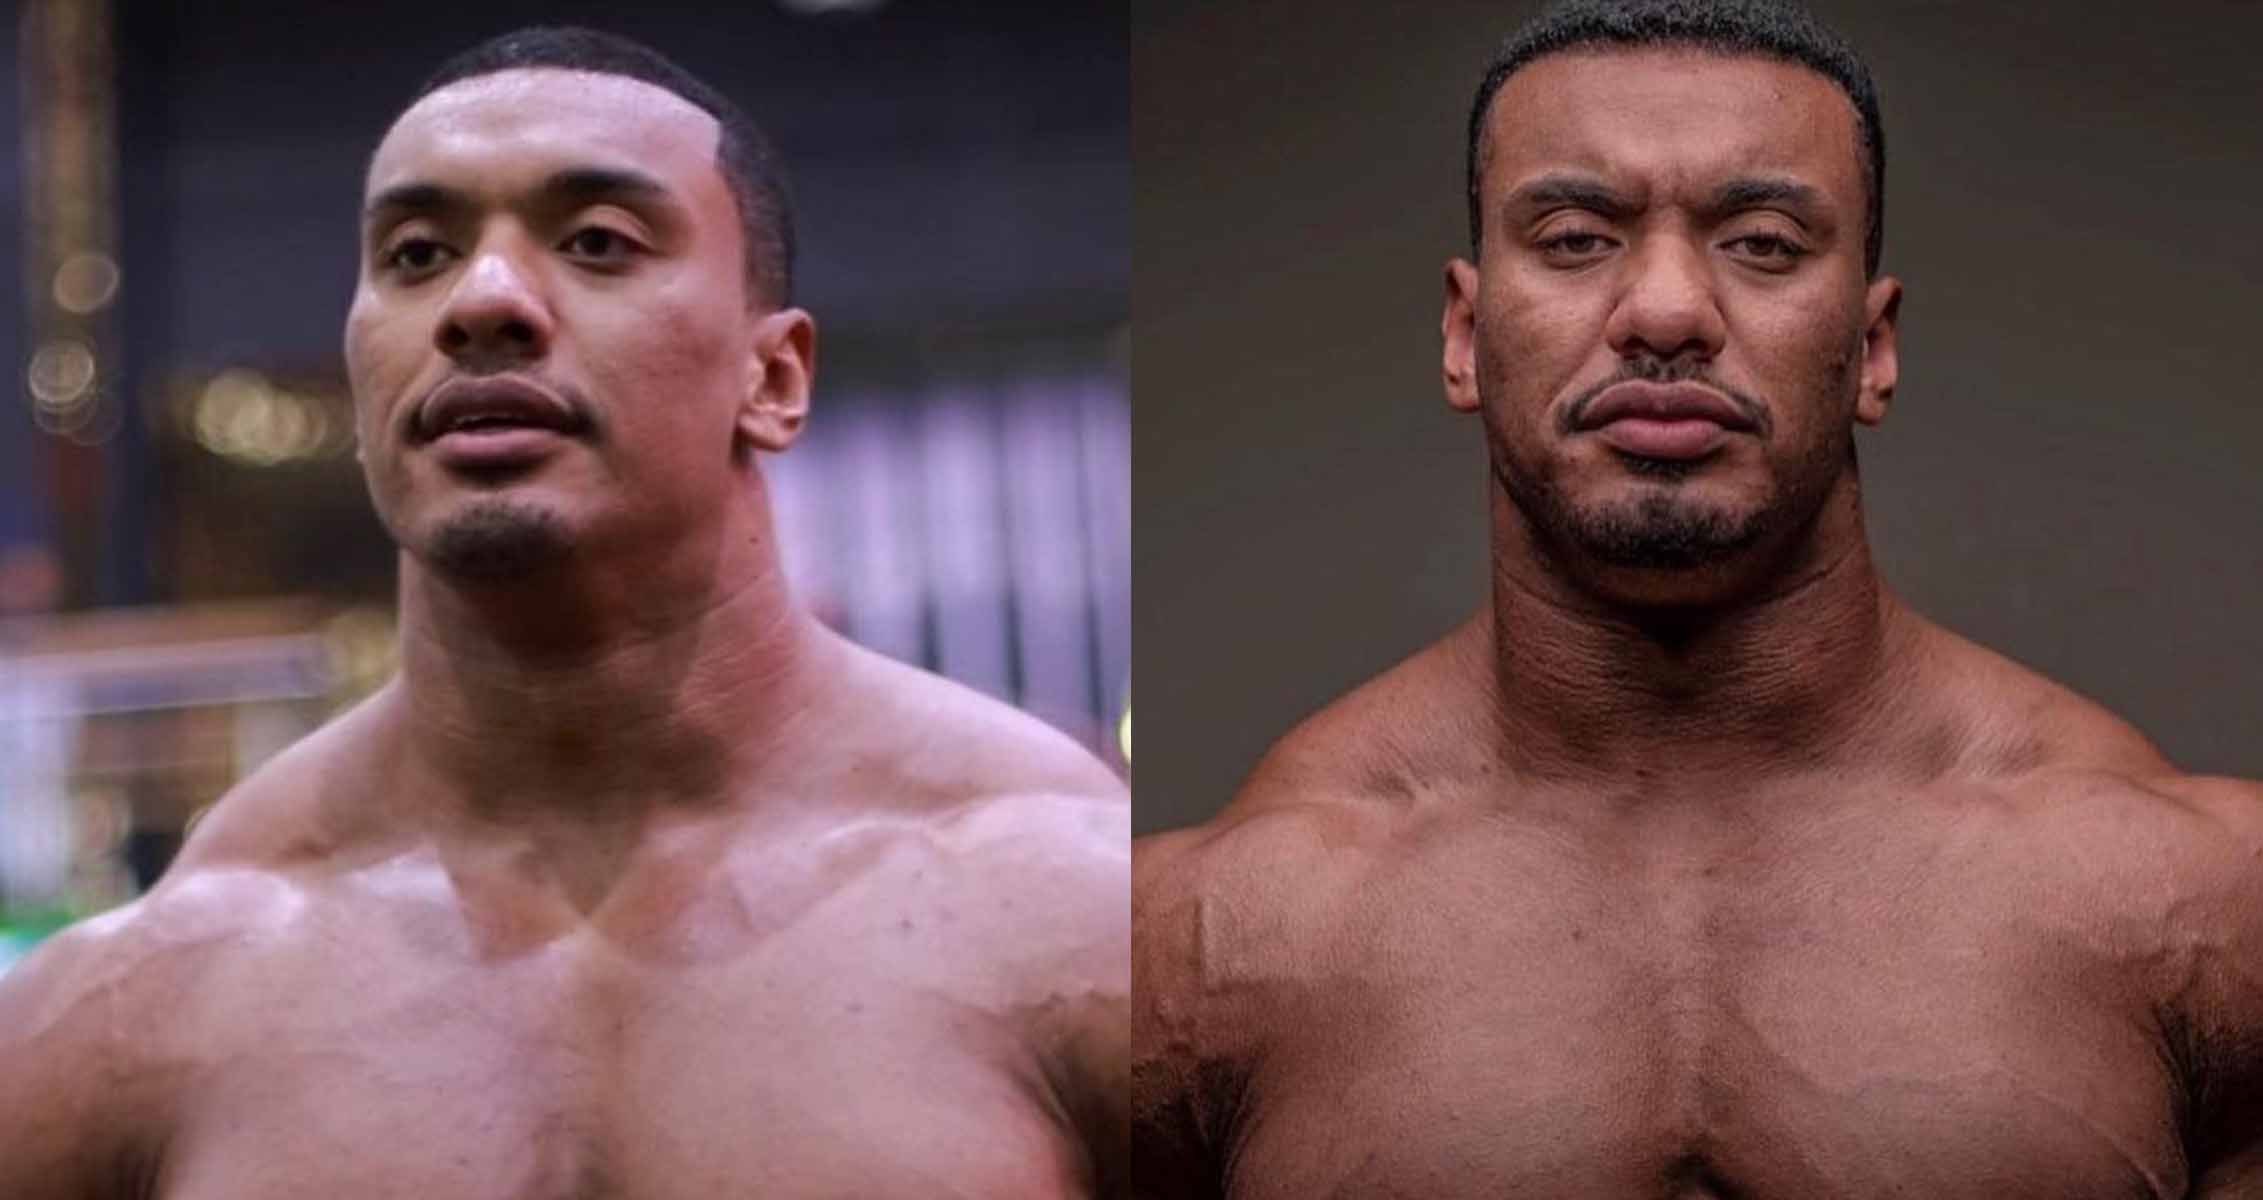 Larry-Wheels-Face-Before-After-Steroids.jpg